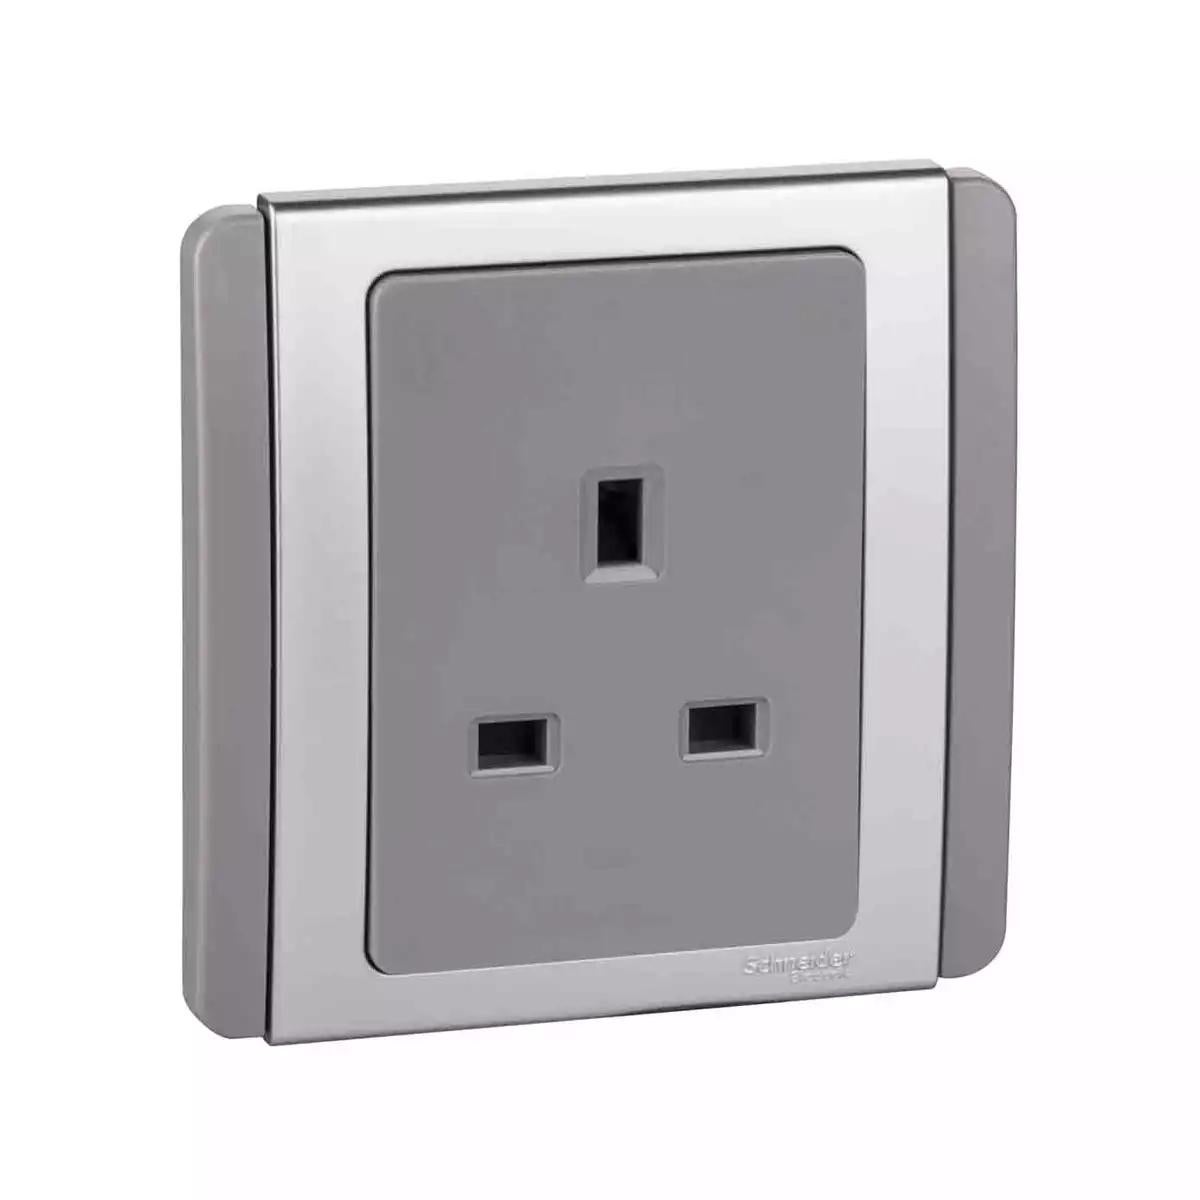 NEO 13A 3 Pin Socket Outlet Grey Silver